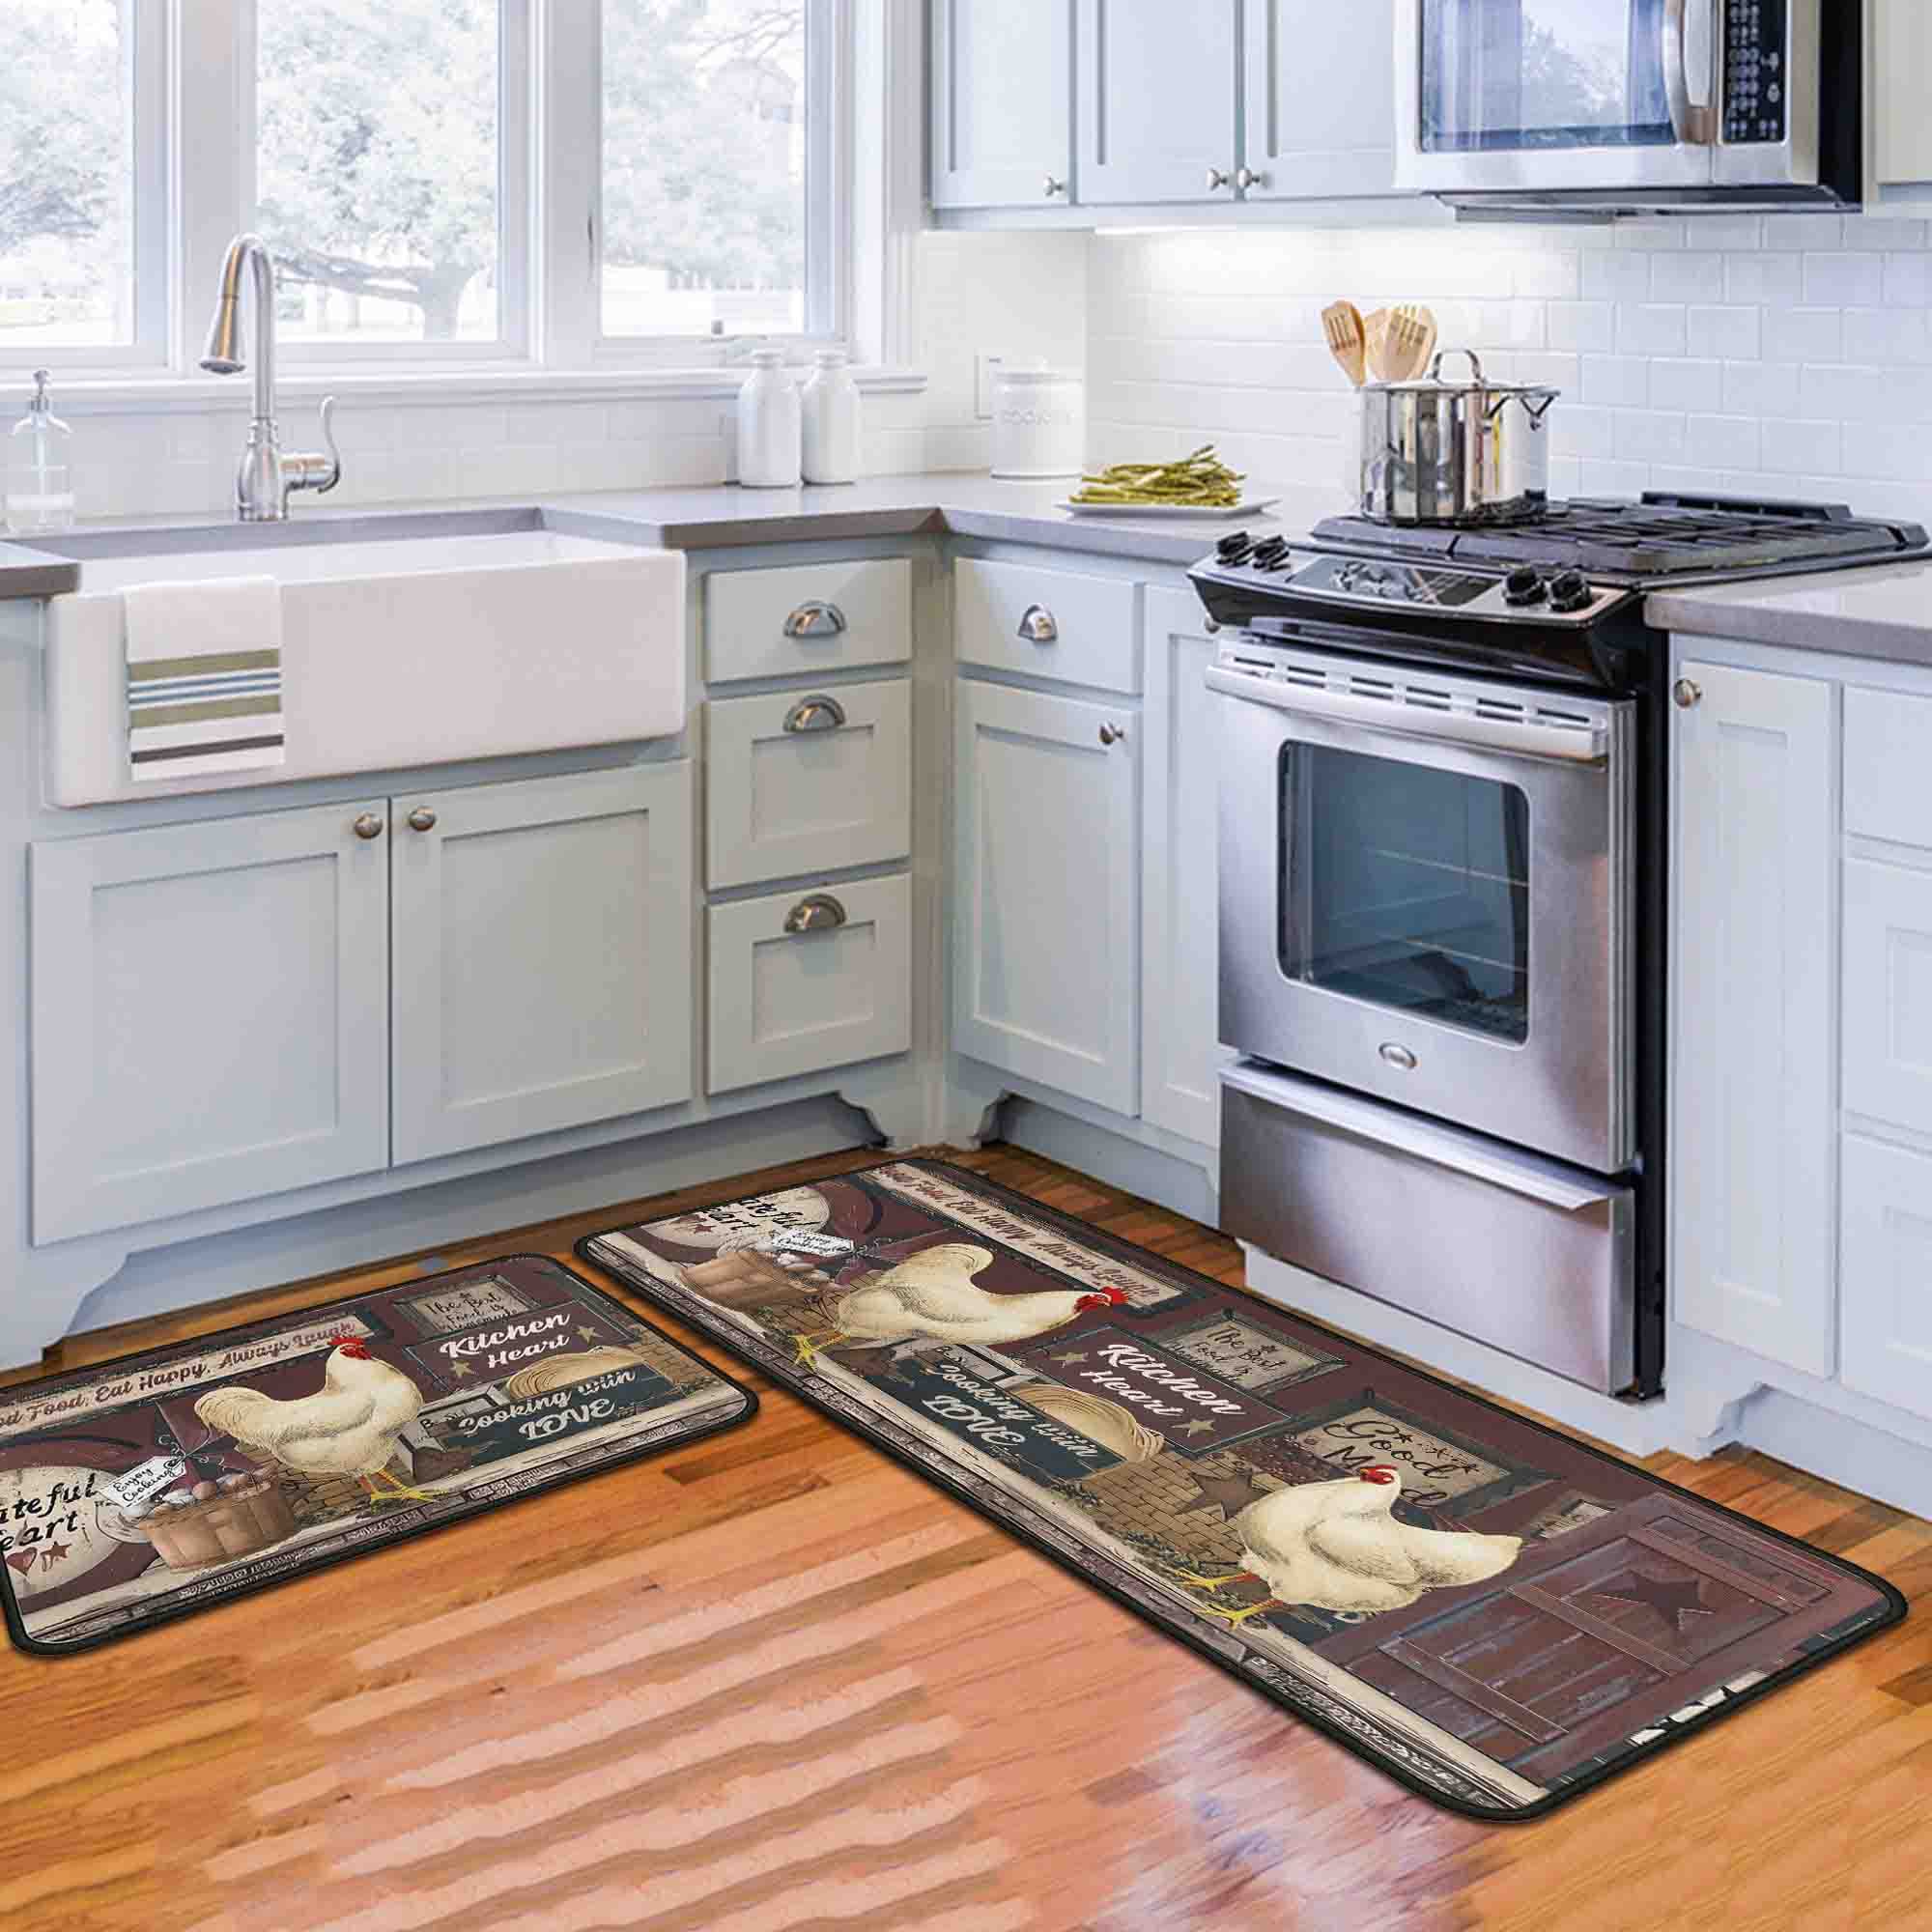 flippana Kitchen Rugs Farmhouse Style for Floor, Rooster Kitchen Rug, Non-Slip Backing Kitchen Mat Set of 2 Washable Kitchen Rug Sets with Runner for Home Kitchen 17"x47.2"+17"x30"